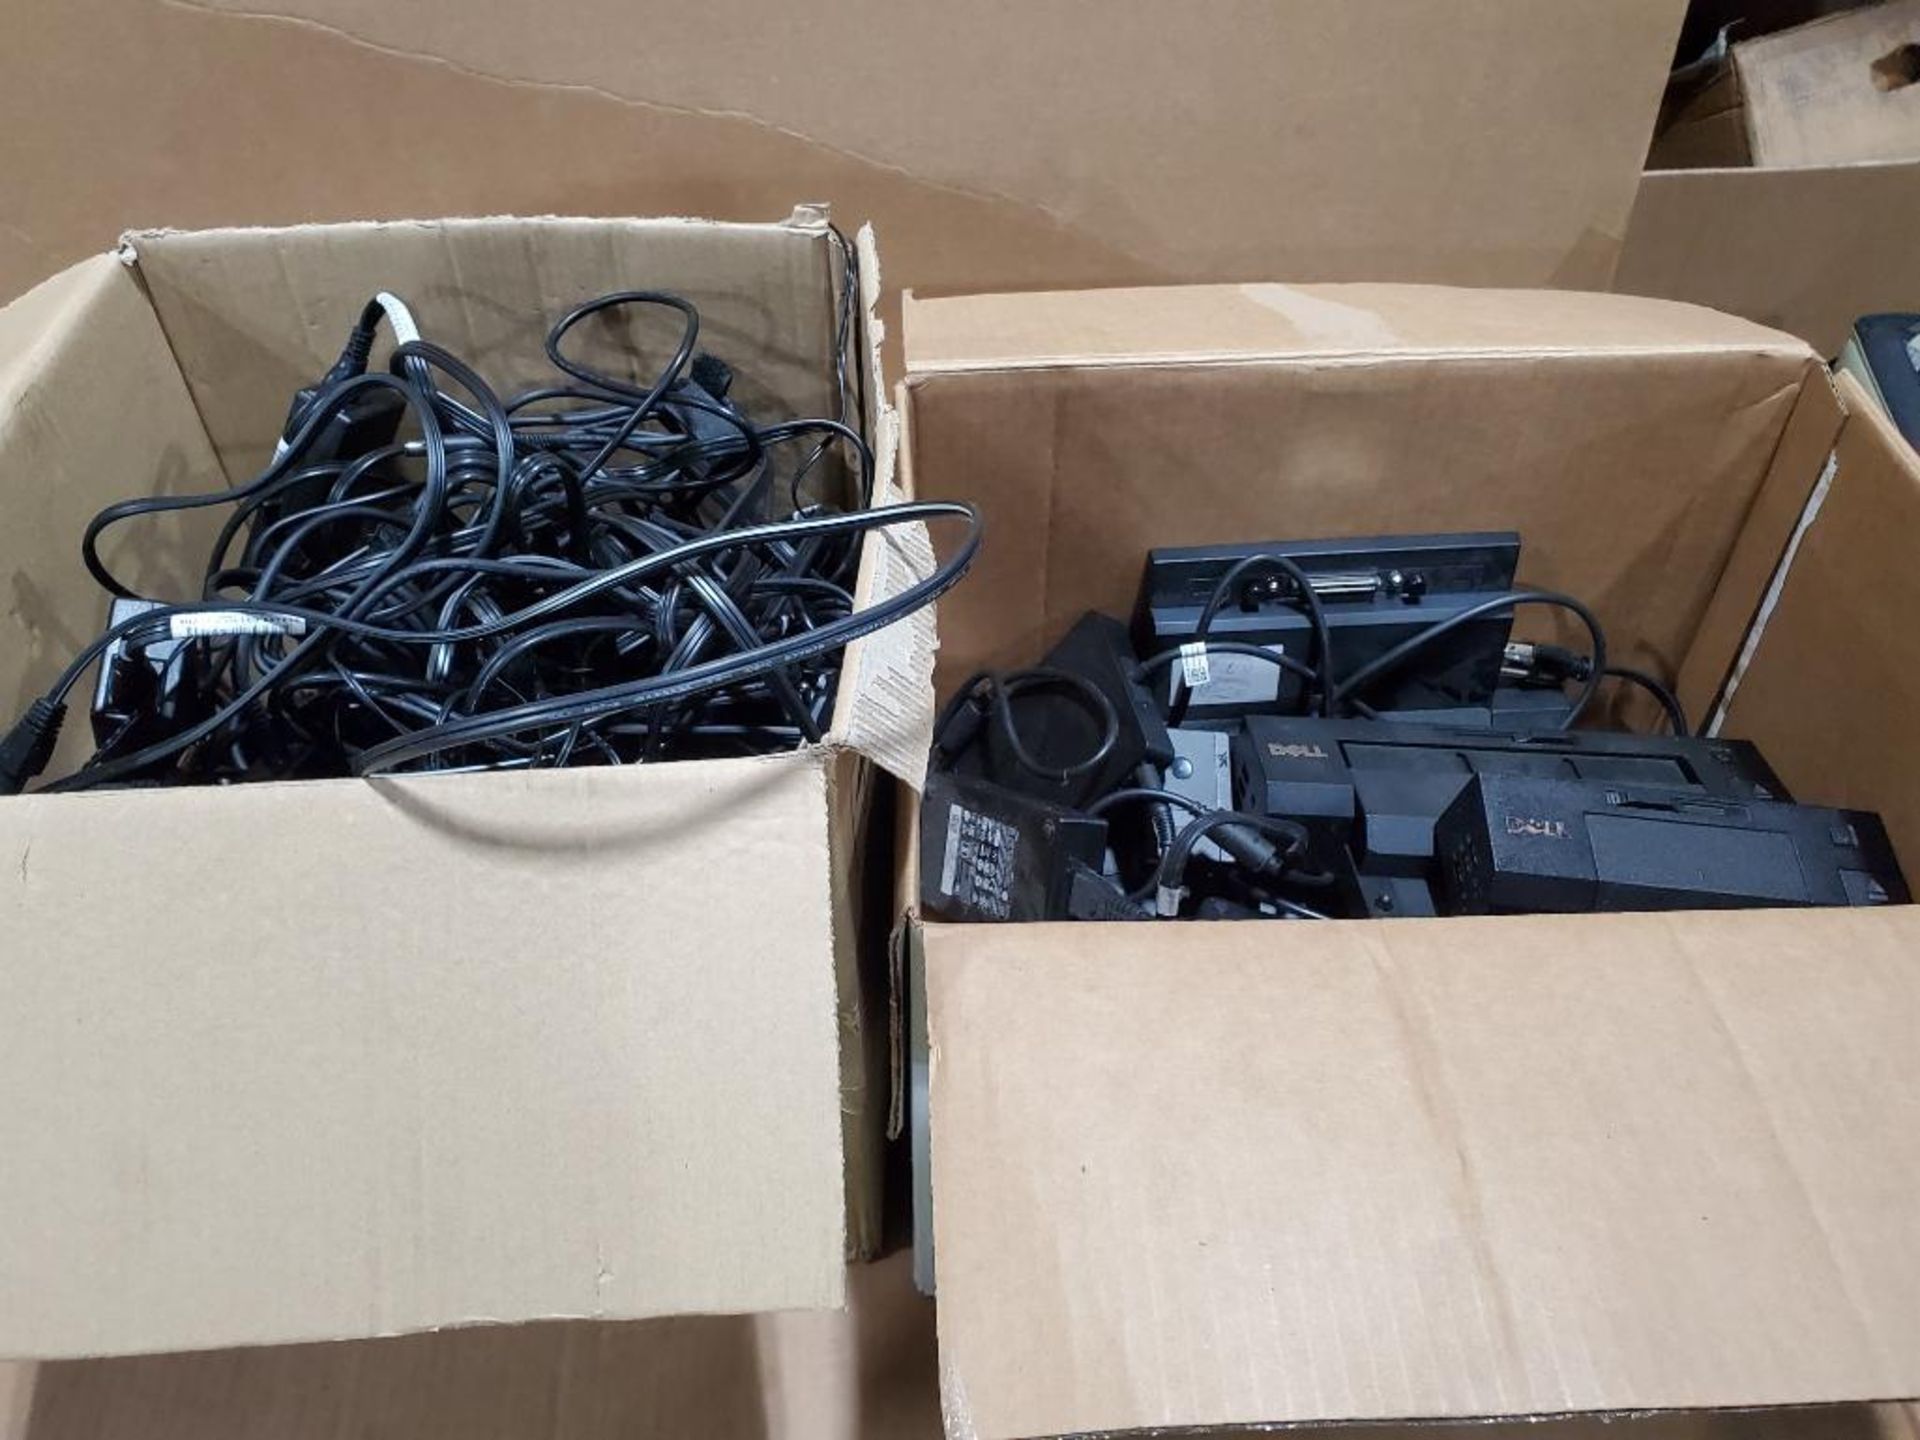 Assorted Dell docking stations and power supplies.